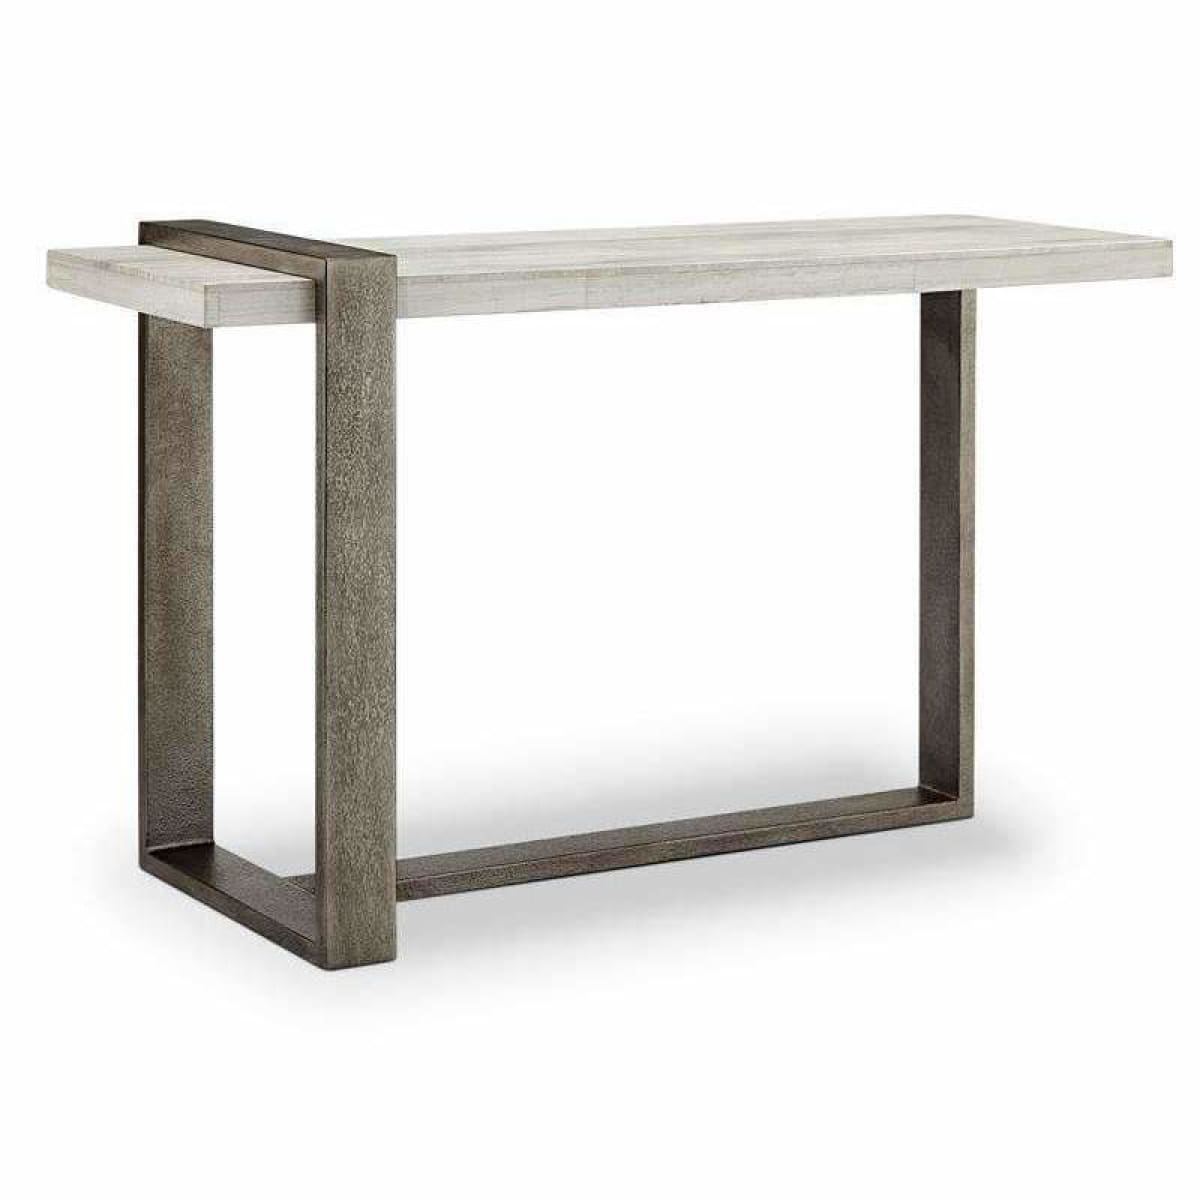 Wiltshire Rectangular Sofa Table - CONSOLE TABLE